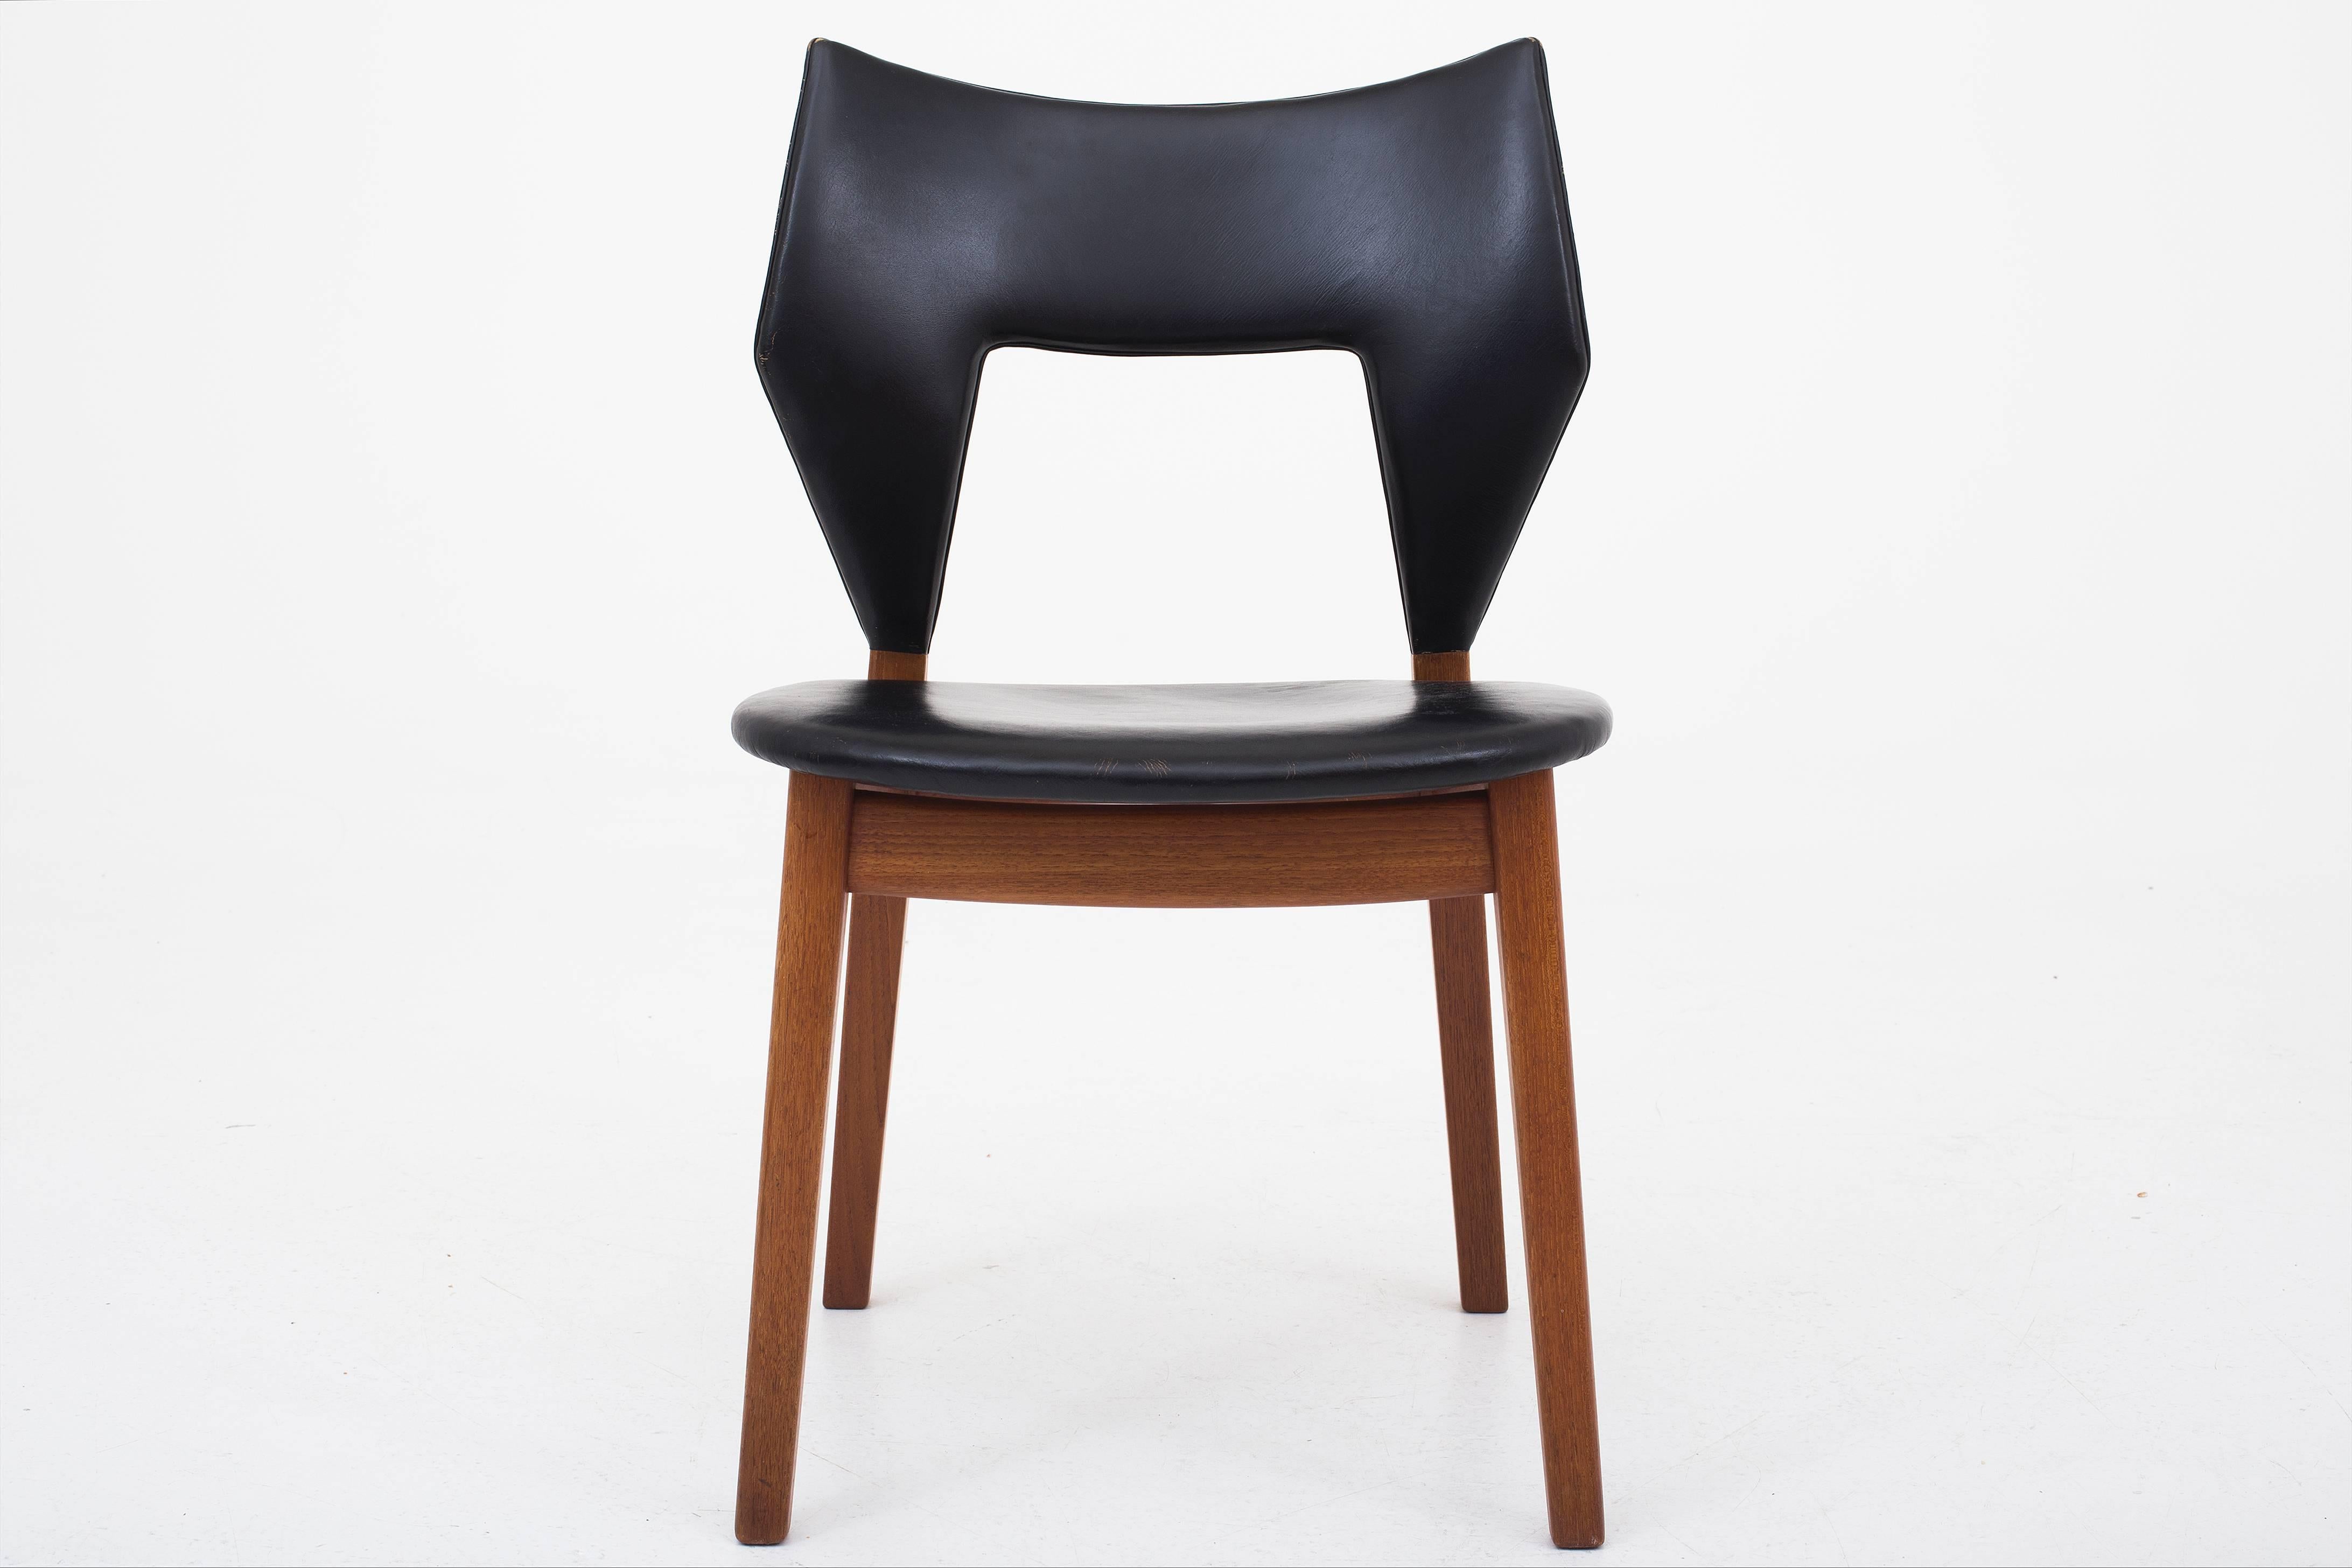 Set of eight dining chairs in teak and original black leather.
Designed by Tove & Edvard Kindt Larsen and produced by cabinetmaker Thorald Madsen.